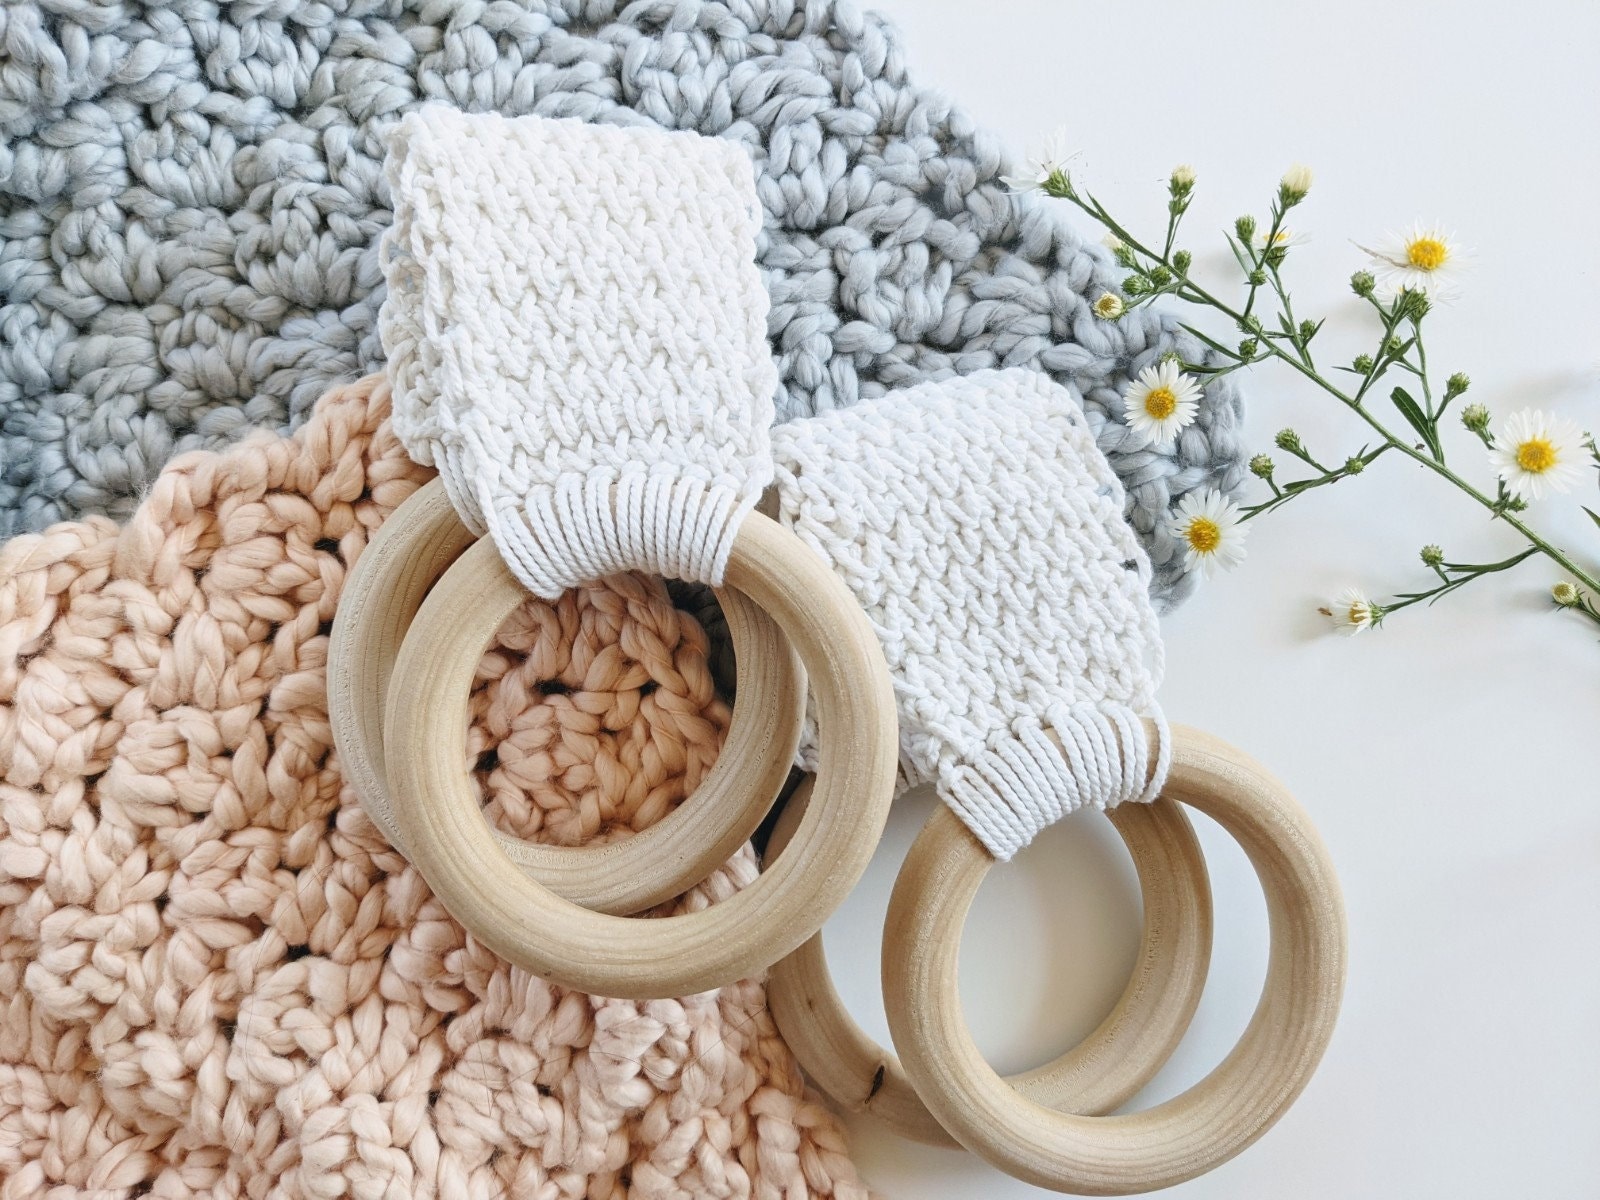 Hand-Knitted Kitchen Towel Holder with Wooden Rings